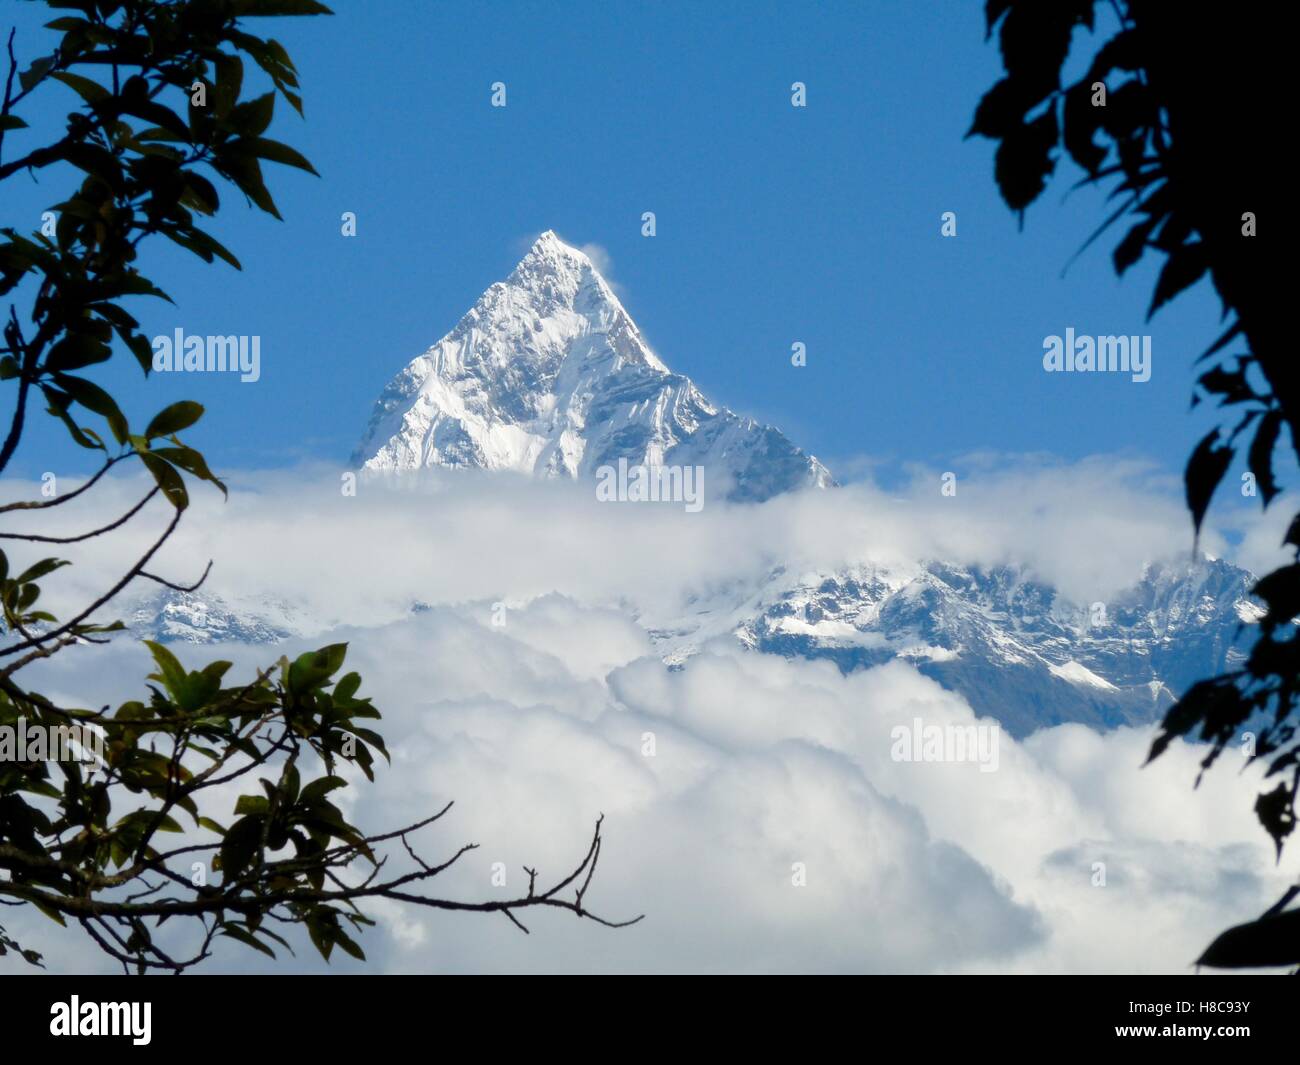 Landscape format view of snowy Fishtail mountain in Annapurna range, Himalayas, Nepal against clear blue sky and framed by trees Stock Photo